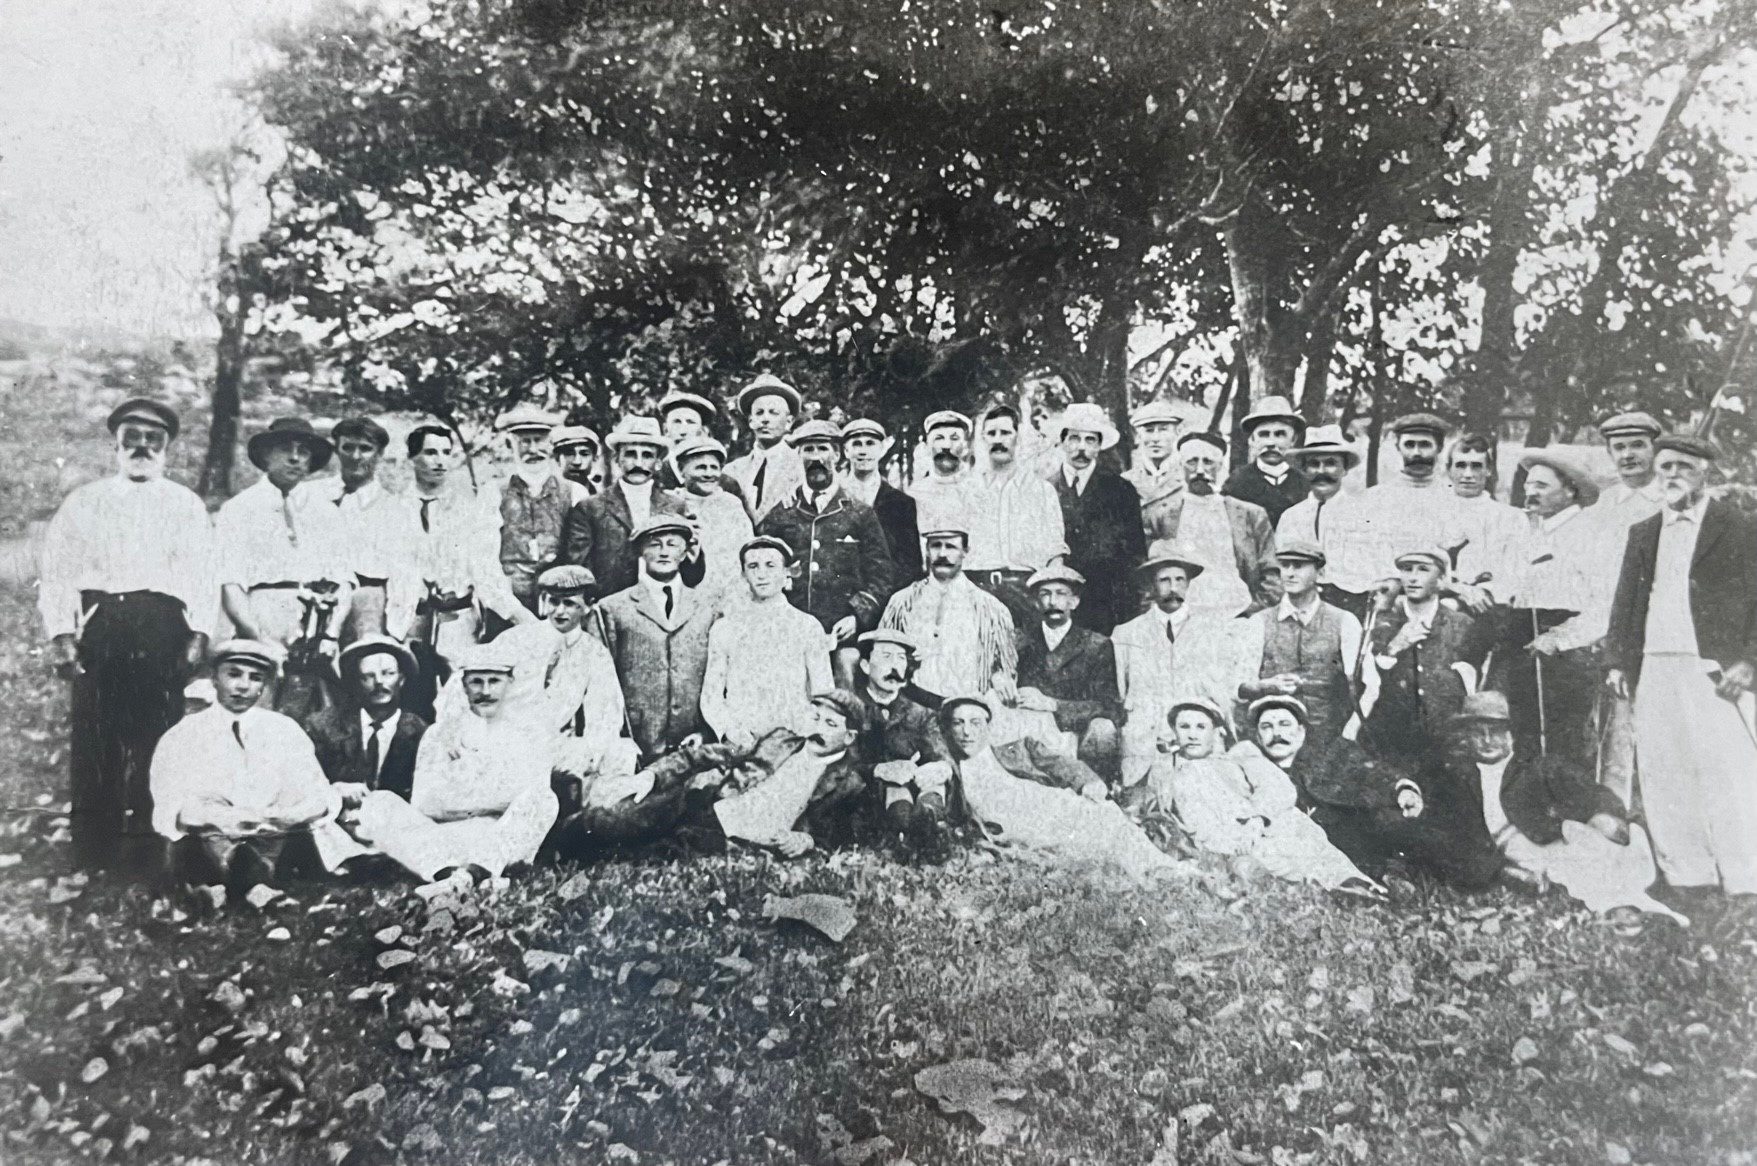 Manly Golf Club early Members 1900's